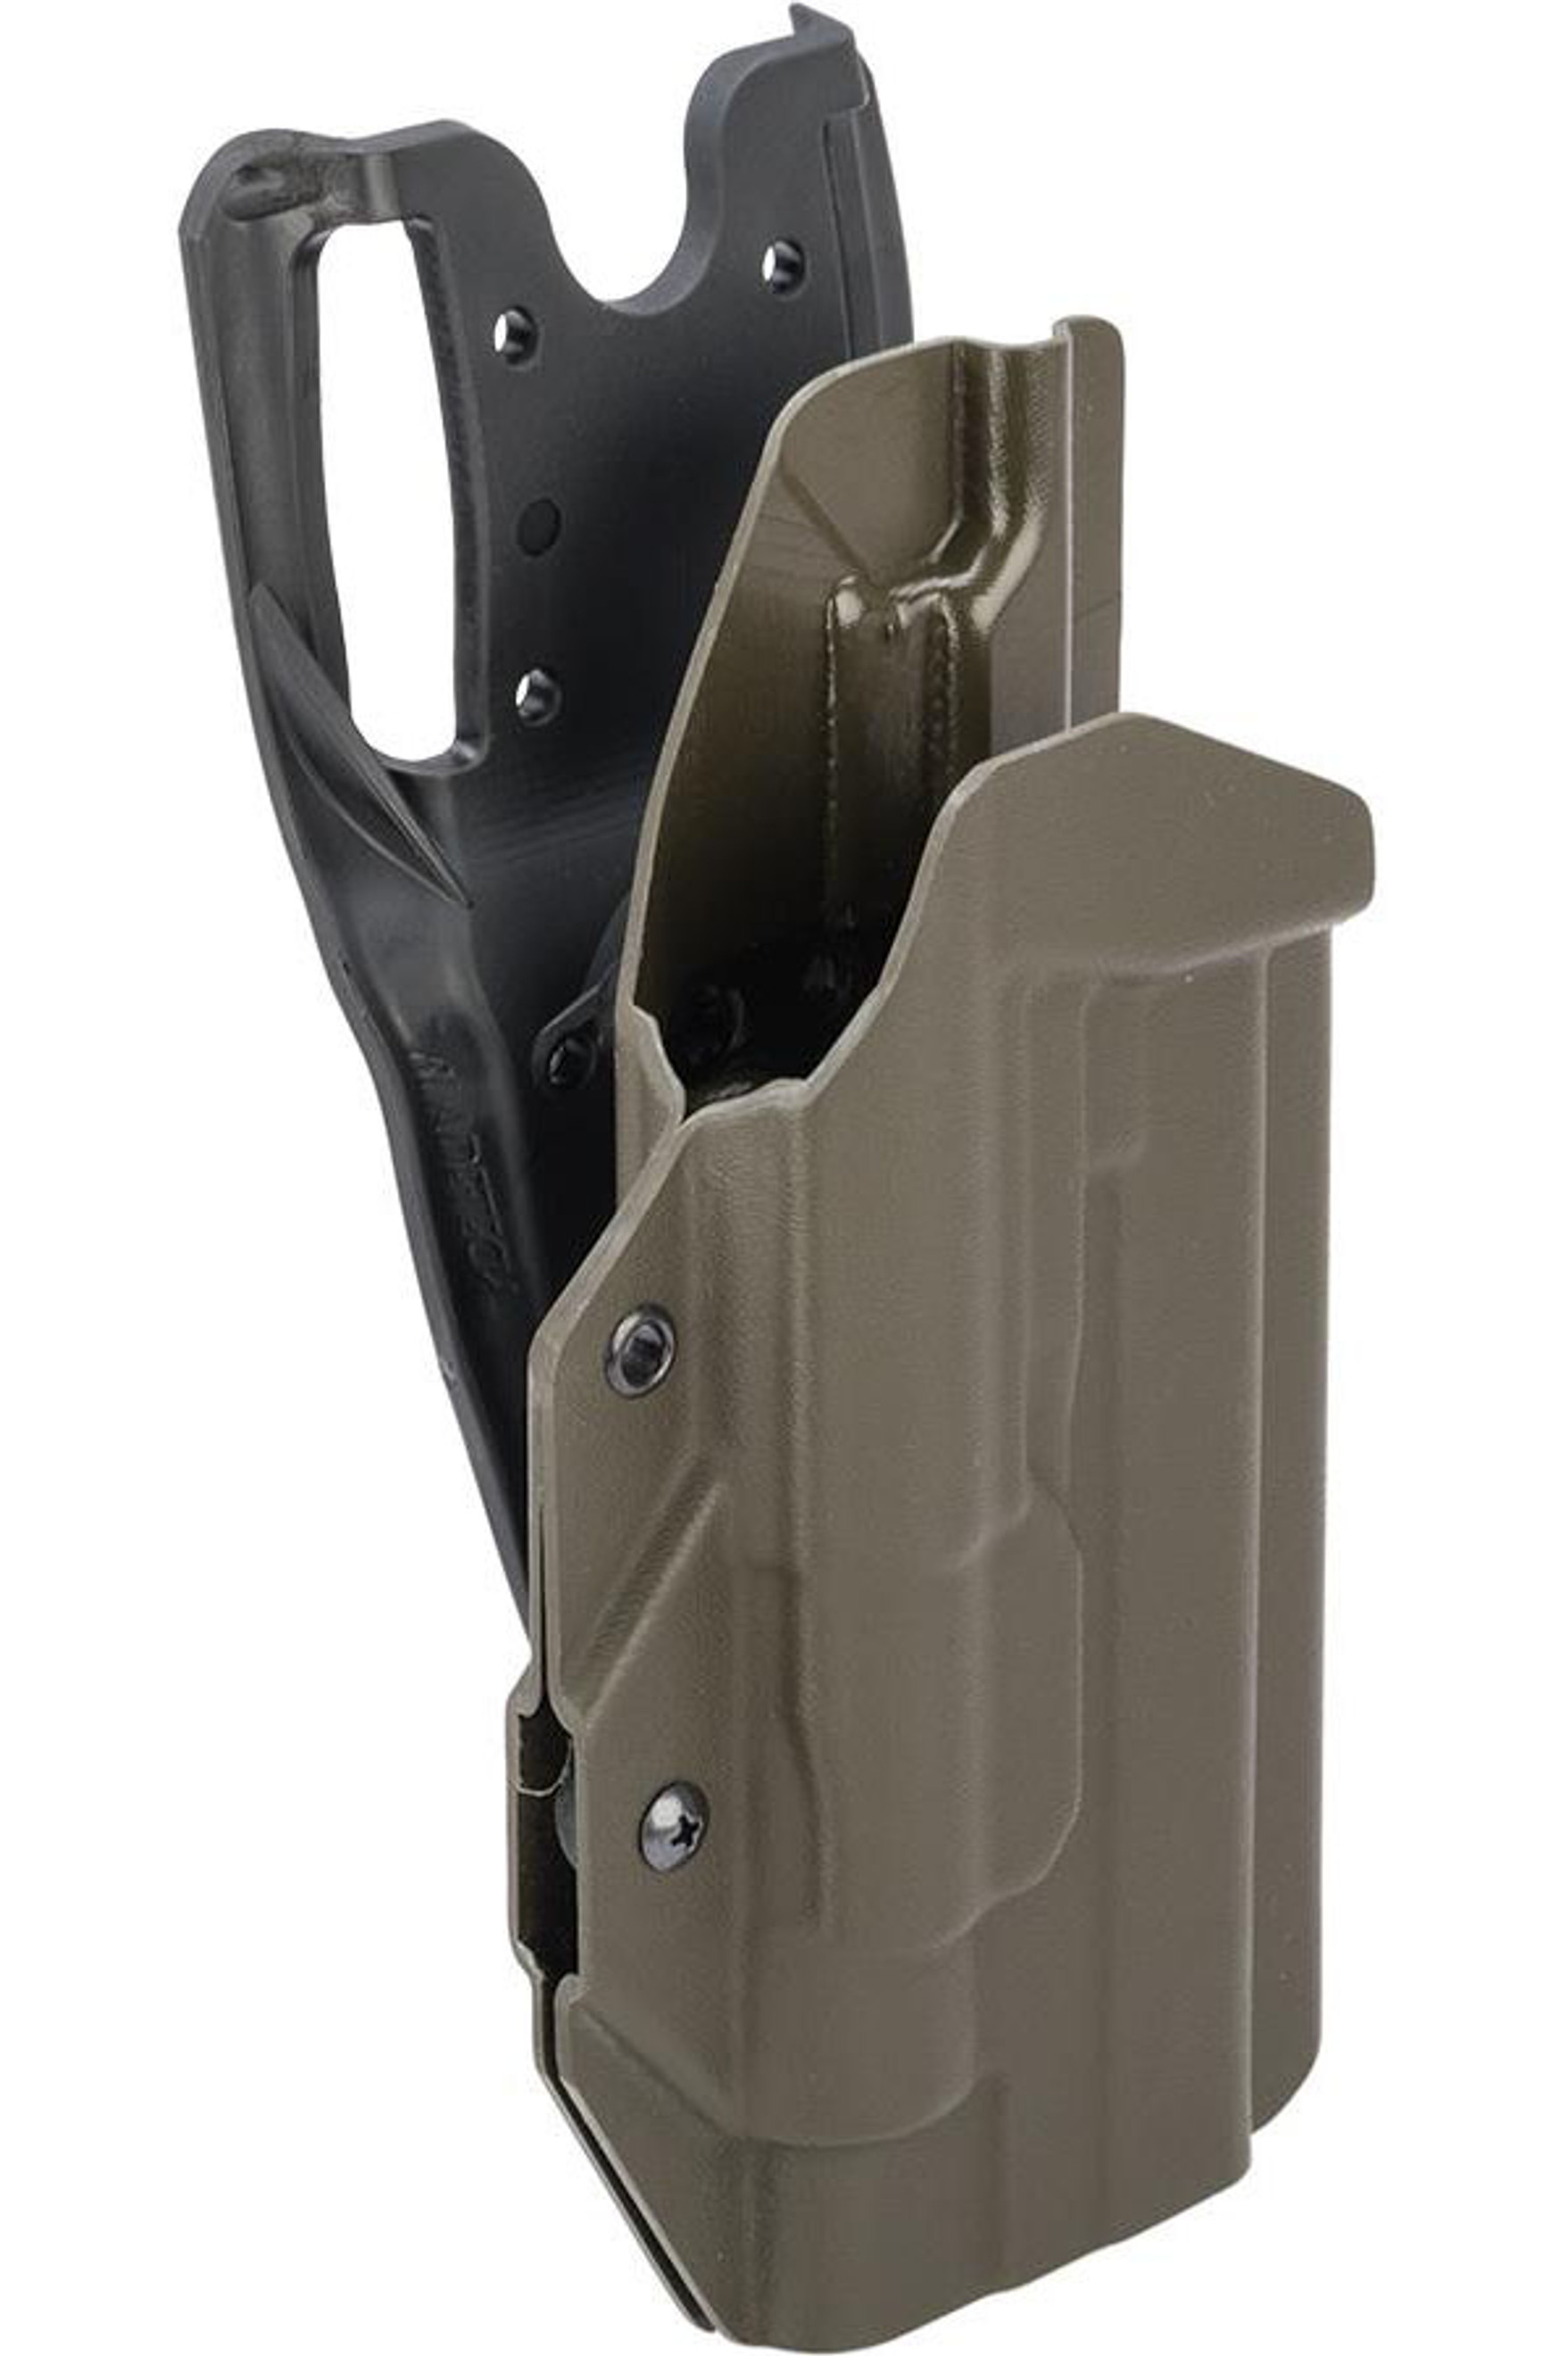 MC Kydex Airsoft Elite Series Pistol Holster for 1911 w/ TLR-1 Flashlight (Model: OD Green / Duty Drop / Right Hand)